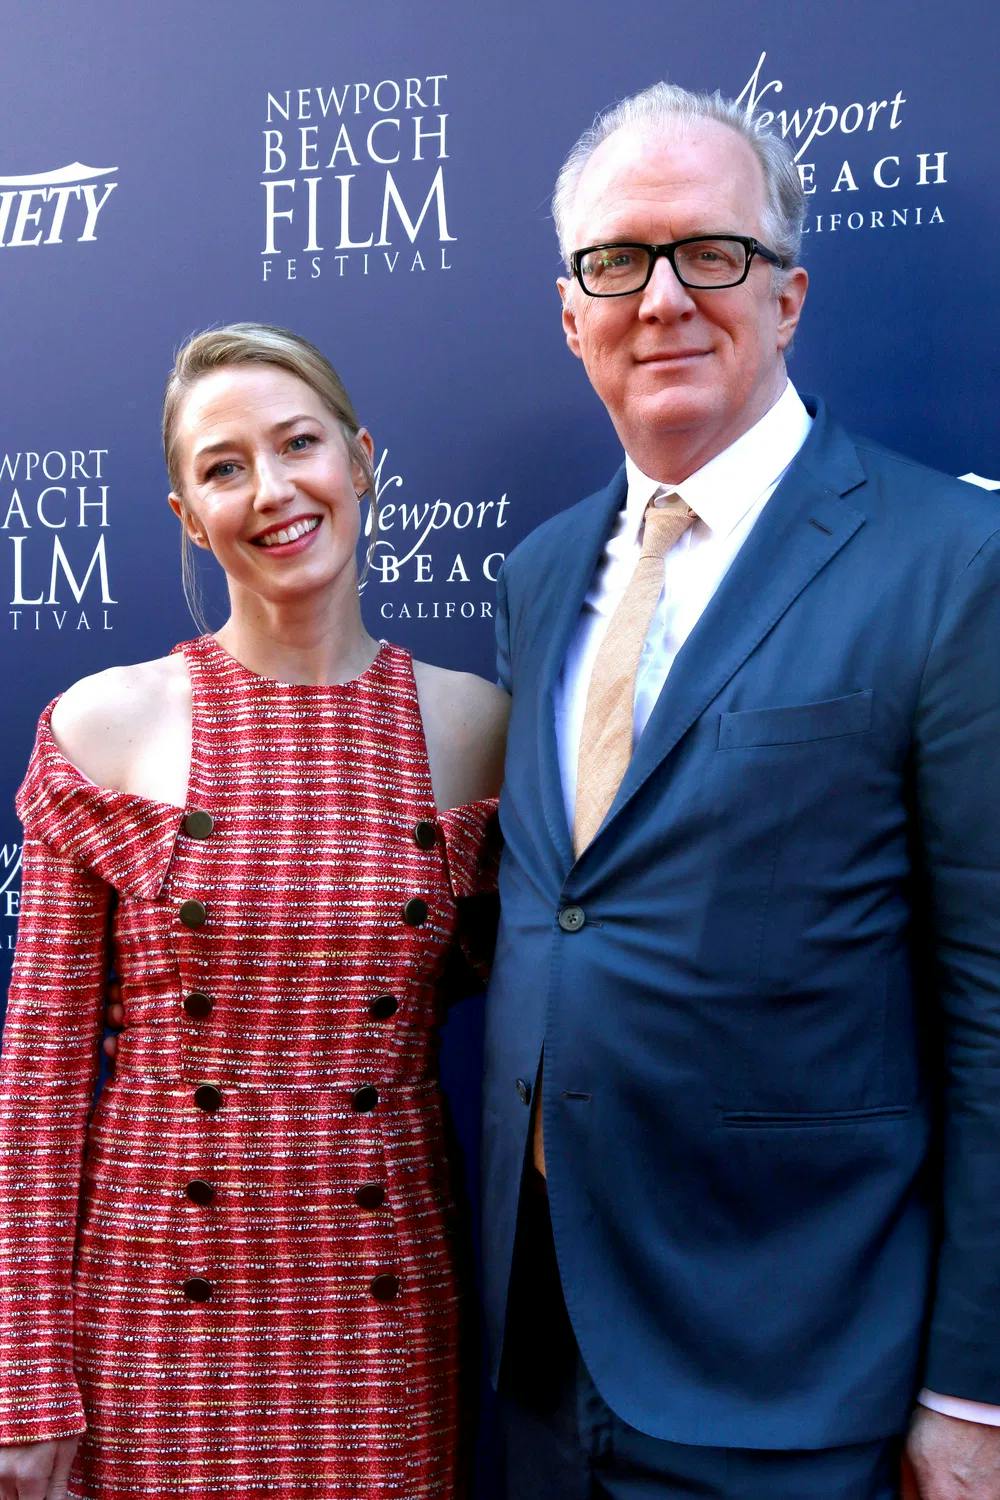 Physical media champions: Carrie Coon and Tracy Letts have a 10 thousand discs collection and counting... / Photo
© Hutchinsphoto, courtesy of Dreamstime.